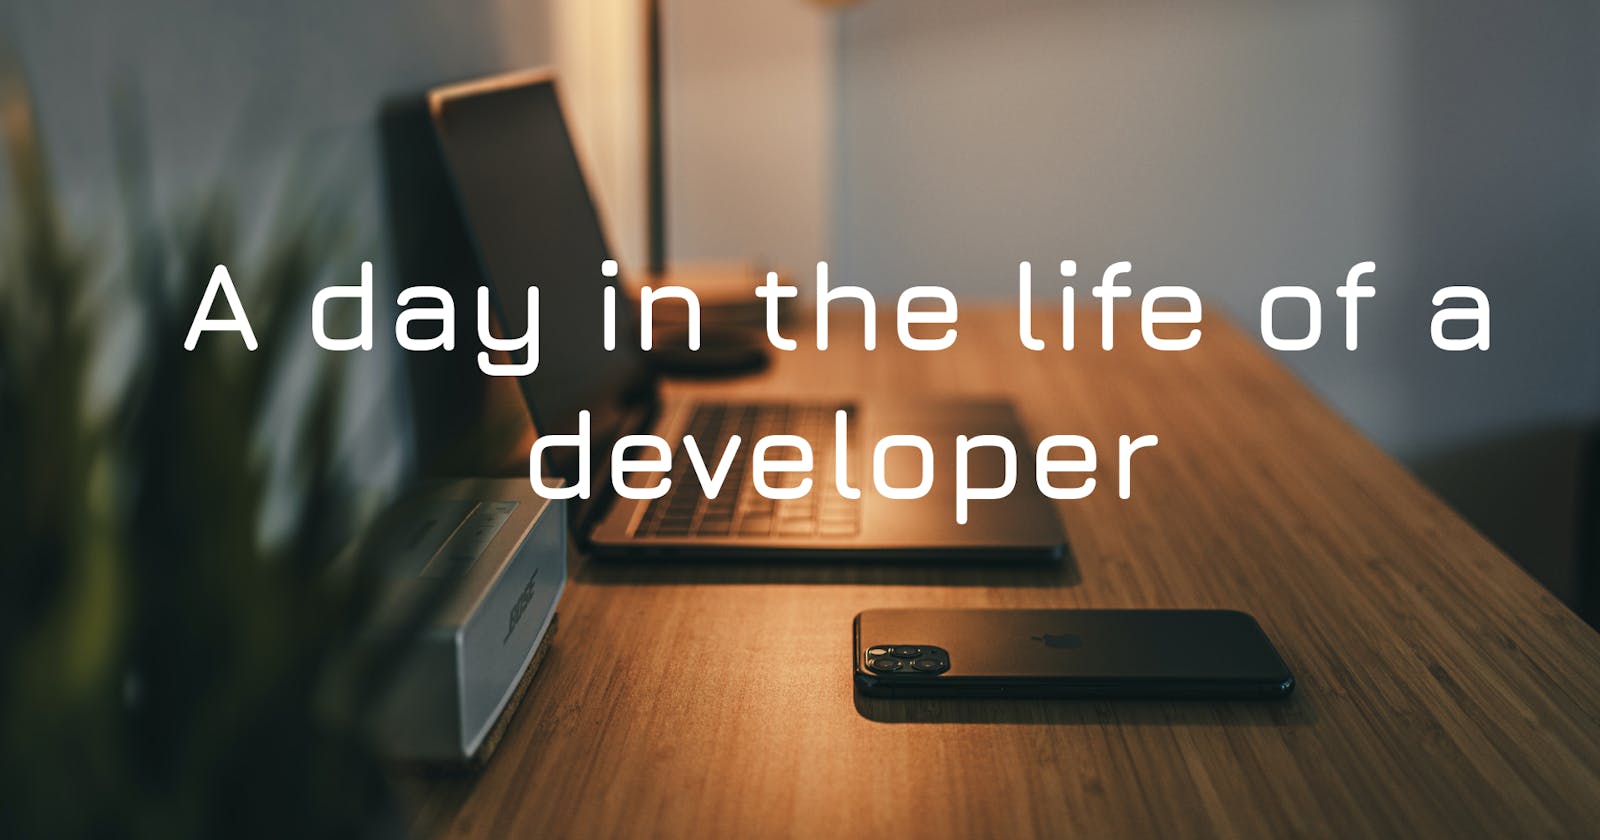 A day in the life of a developer